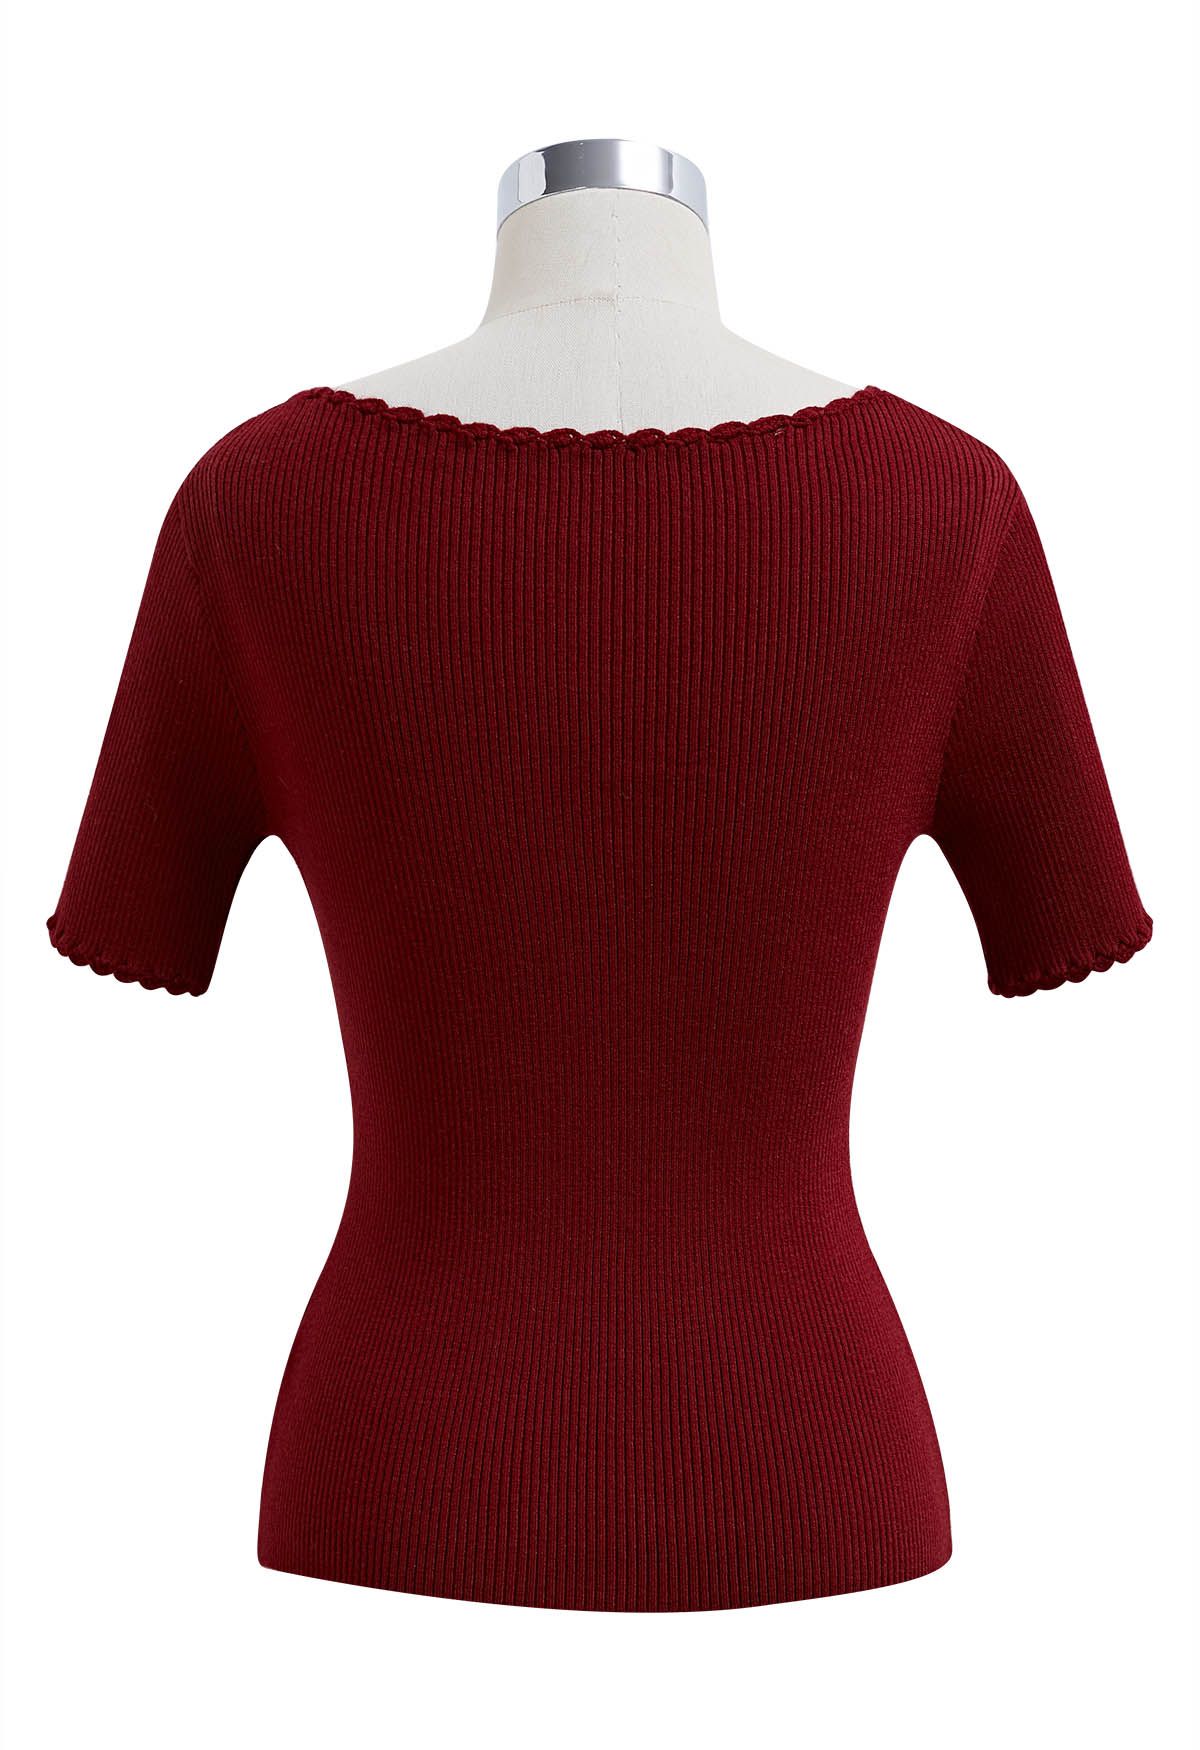 Scalloped Edge Square Neck Short Sleeve Knit Top in Burgundy